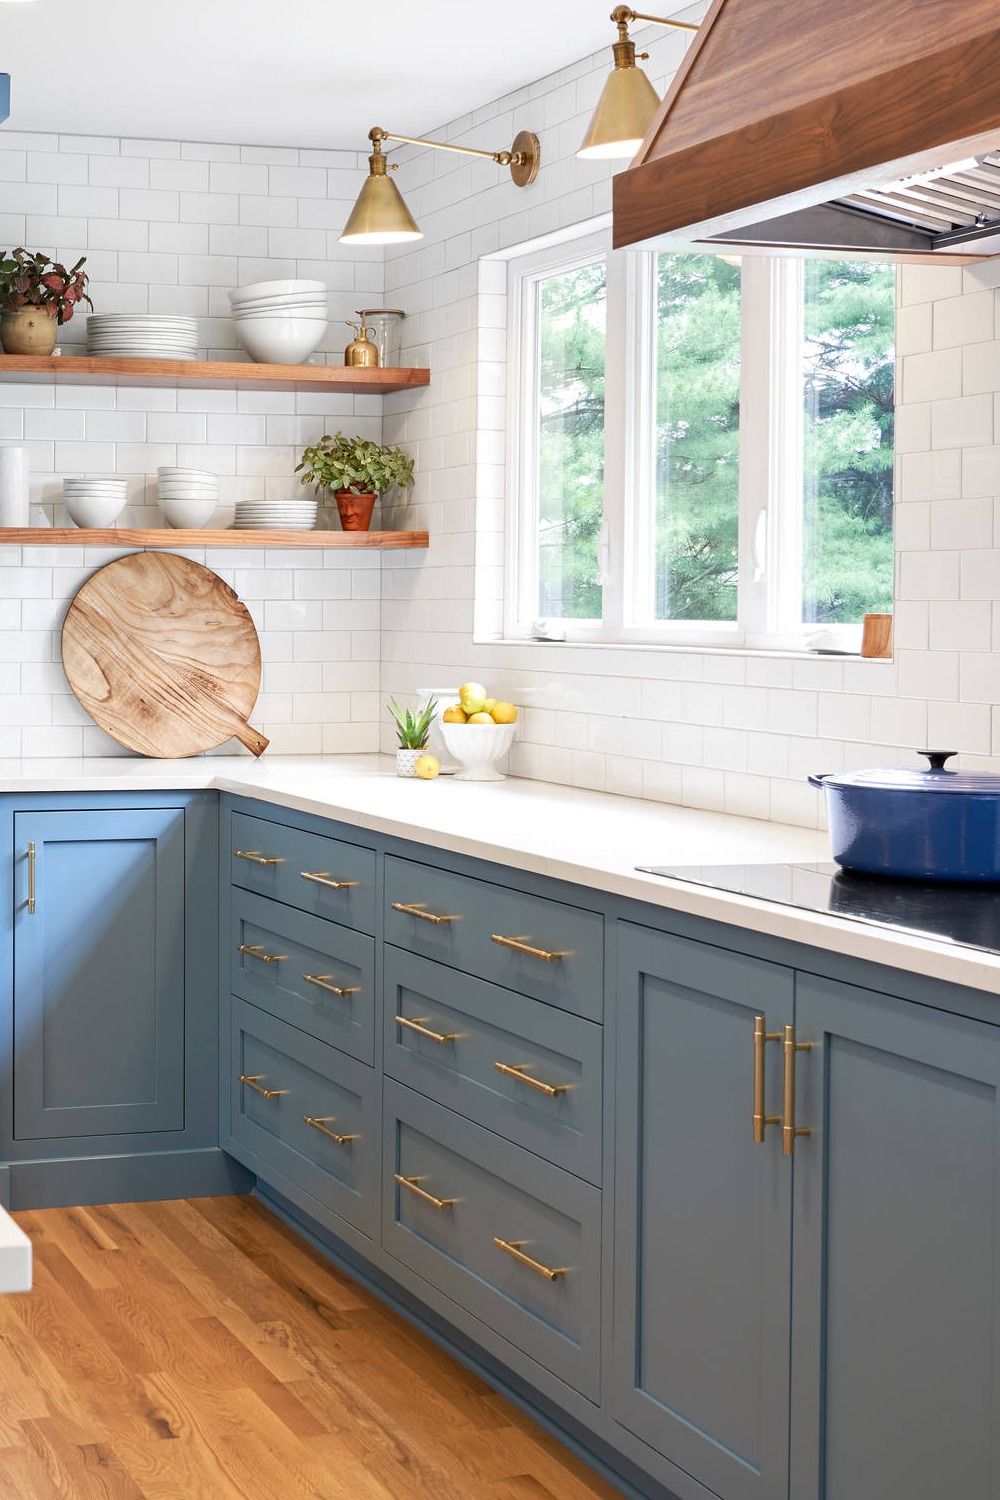 Light Blue Lower Cabinets Shaker Cabinets White Countertops Brass Handles Subway Tiles